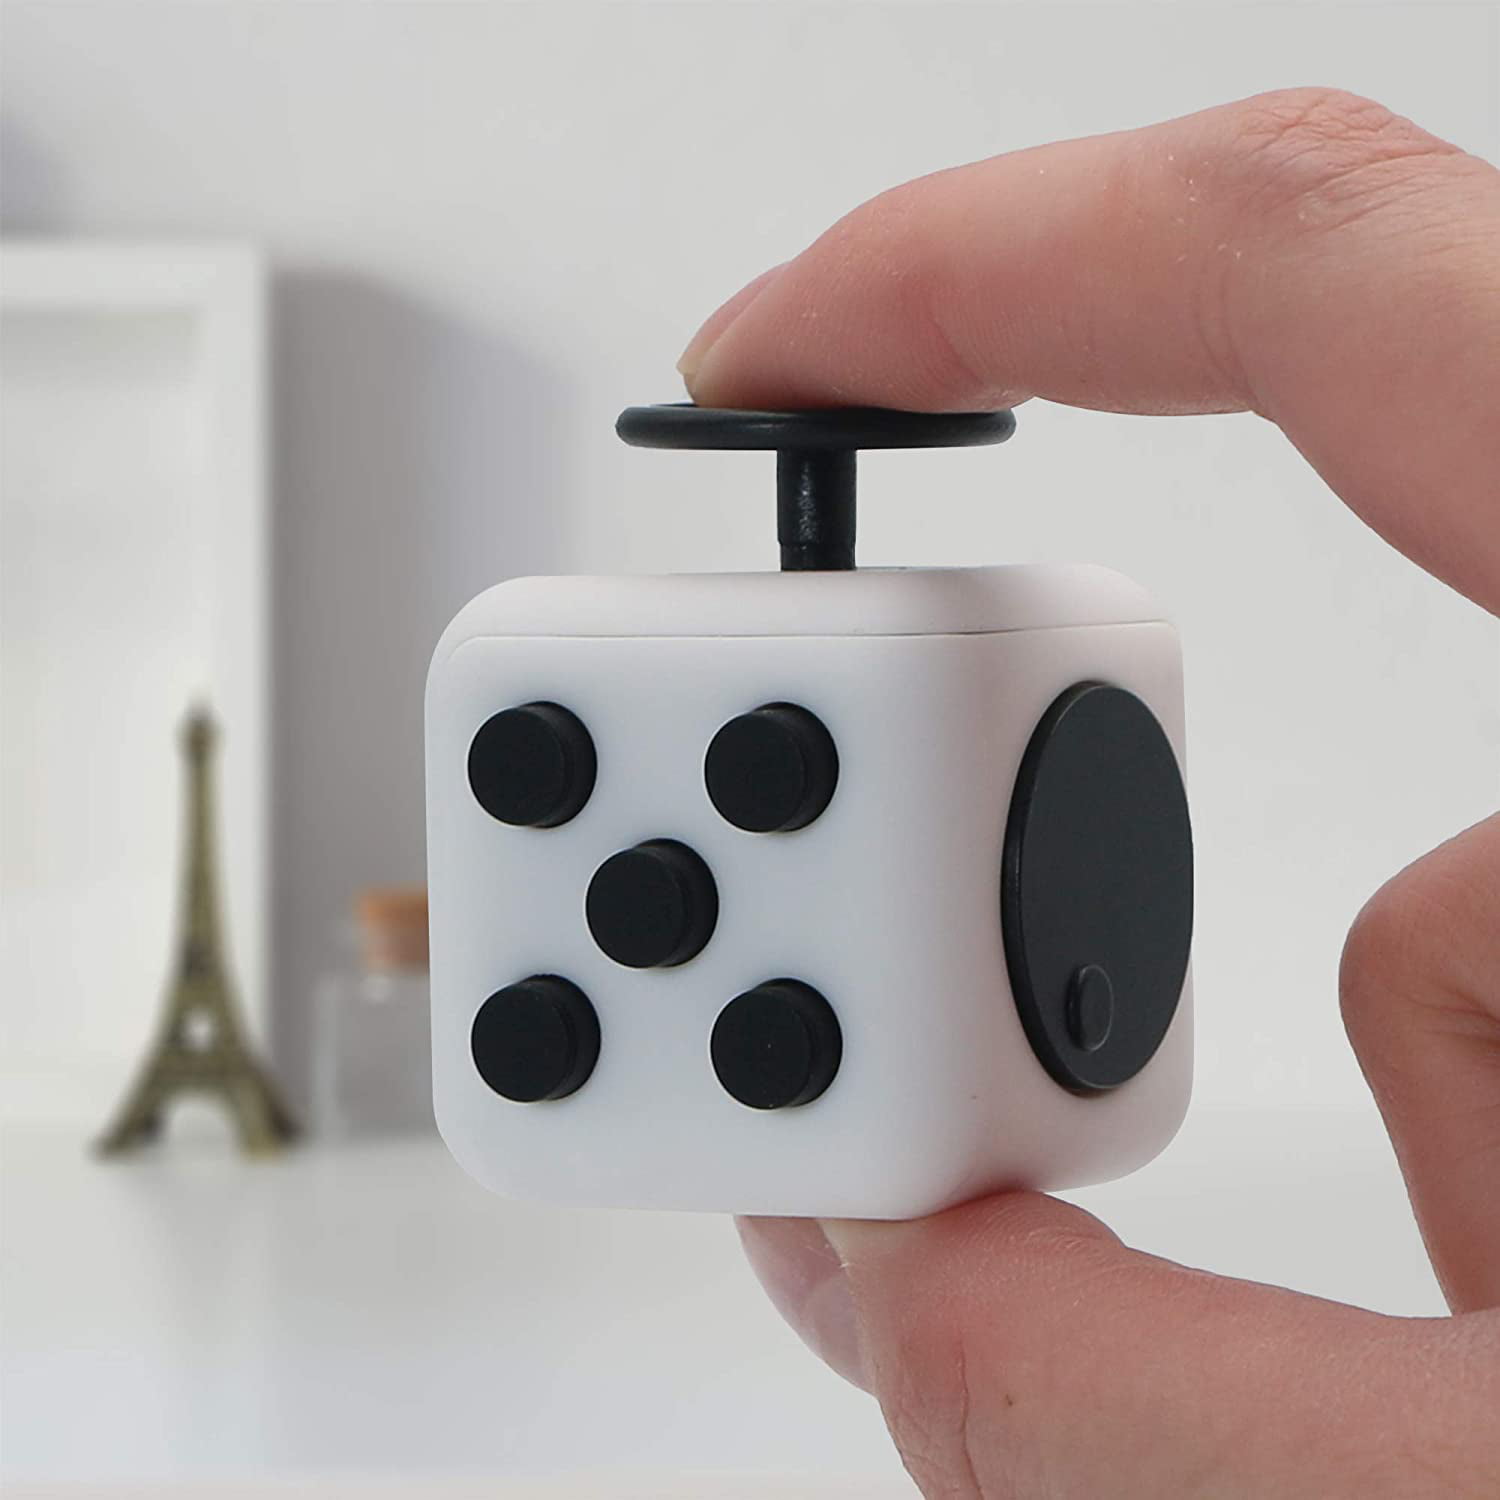 VCOSTORE Fidget Cube with 12 Sides - Original Cubo Antiestres Adultos Dado  Antiestres Fidget Cube Toy for All Ages with ADHD, Add, ASD, ADHD